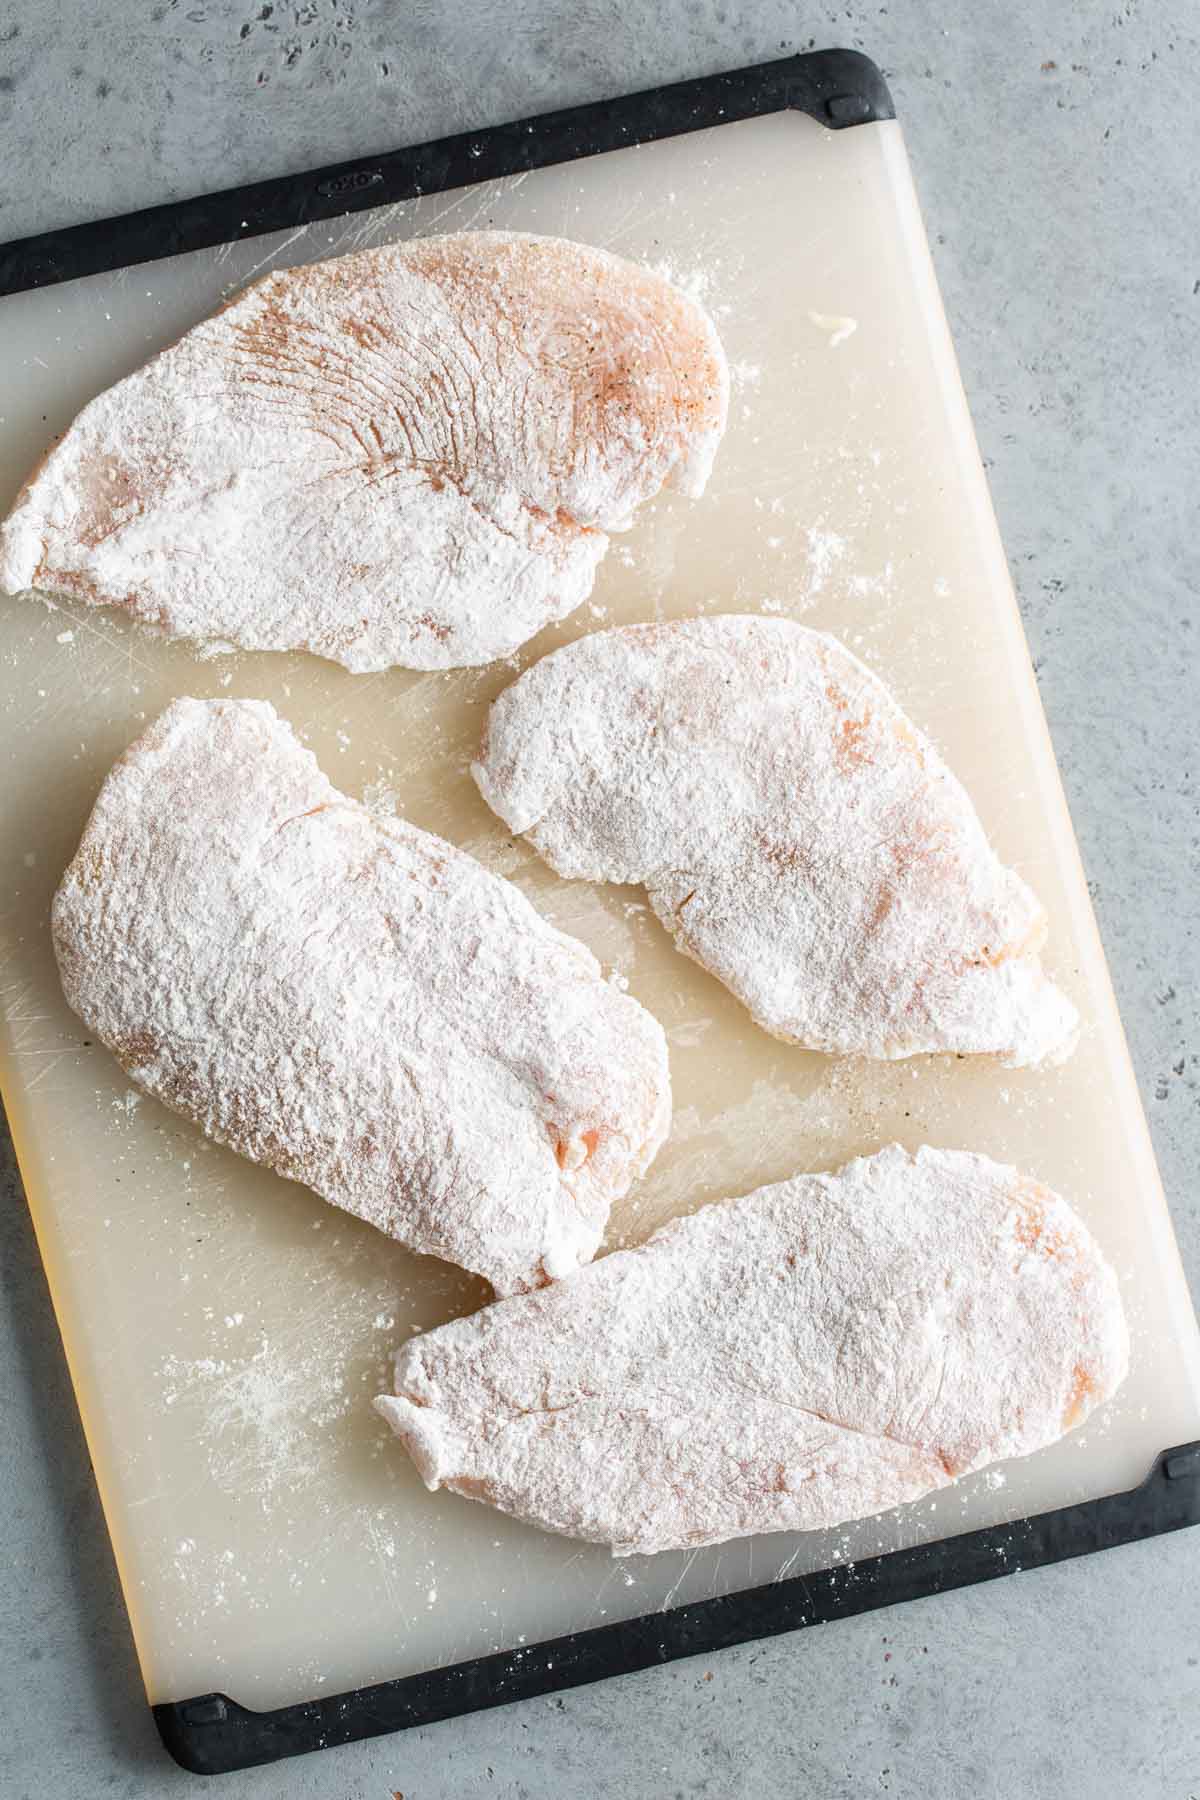 Chicken breasts on a cutting board covered in flour.